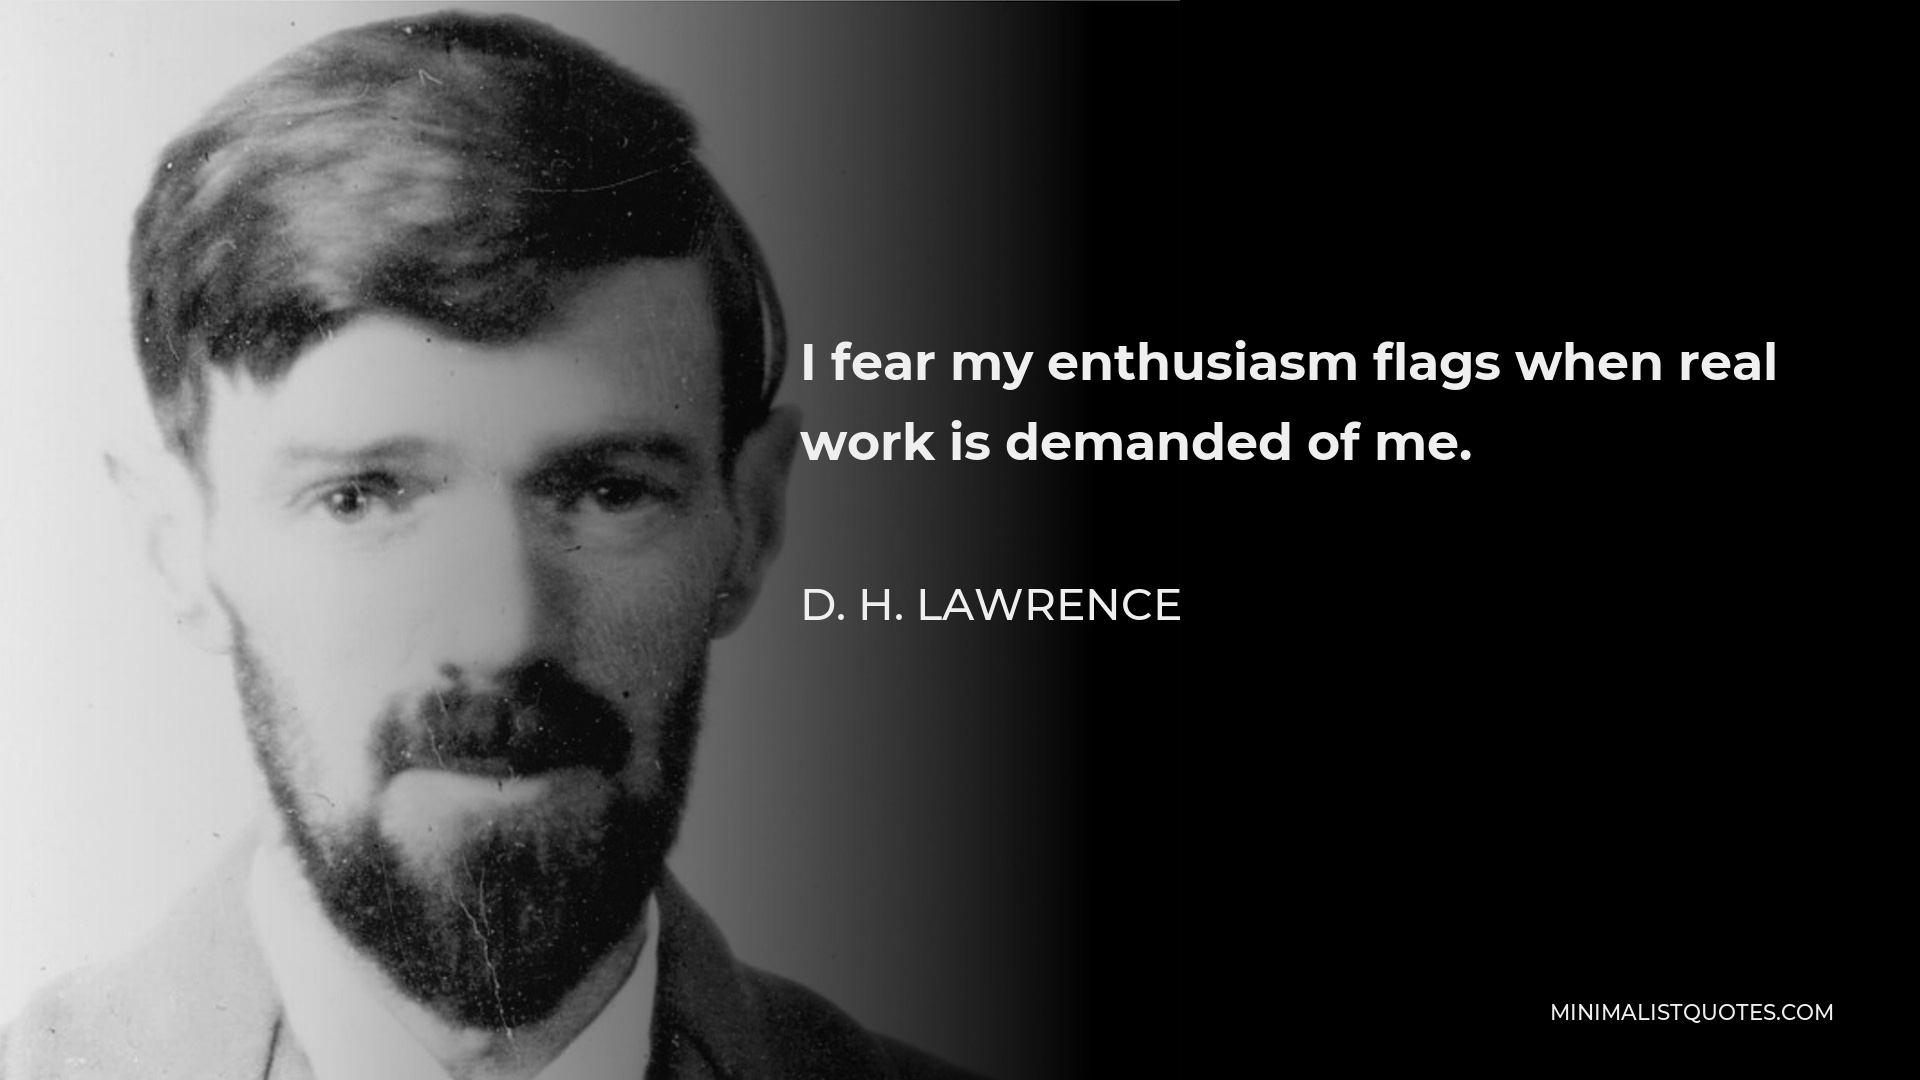 D. H. Lawrence Quote - I fear my enthusiasm flags when real work is demanded of me.